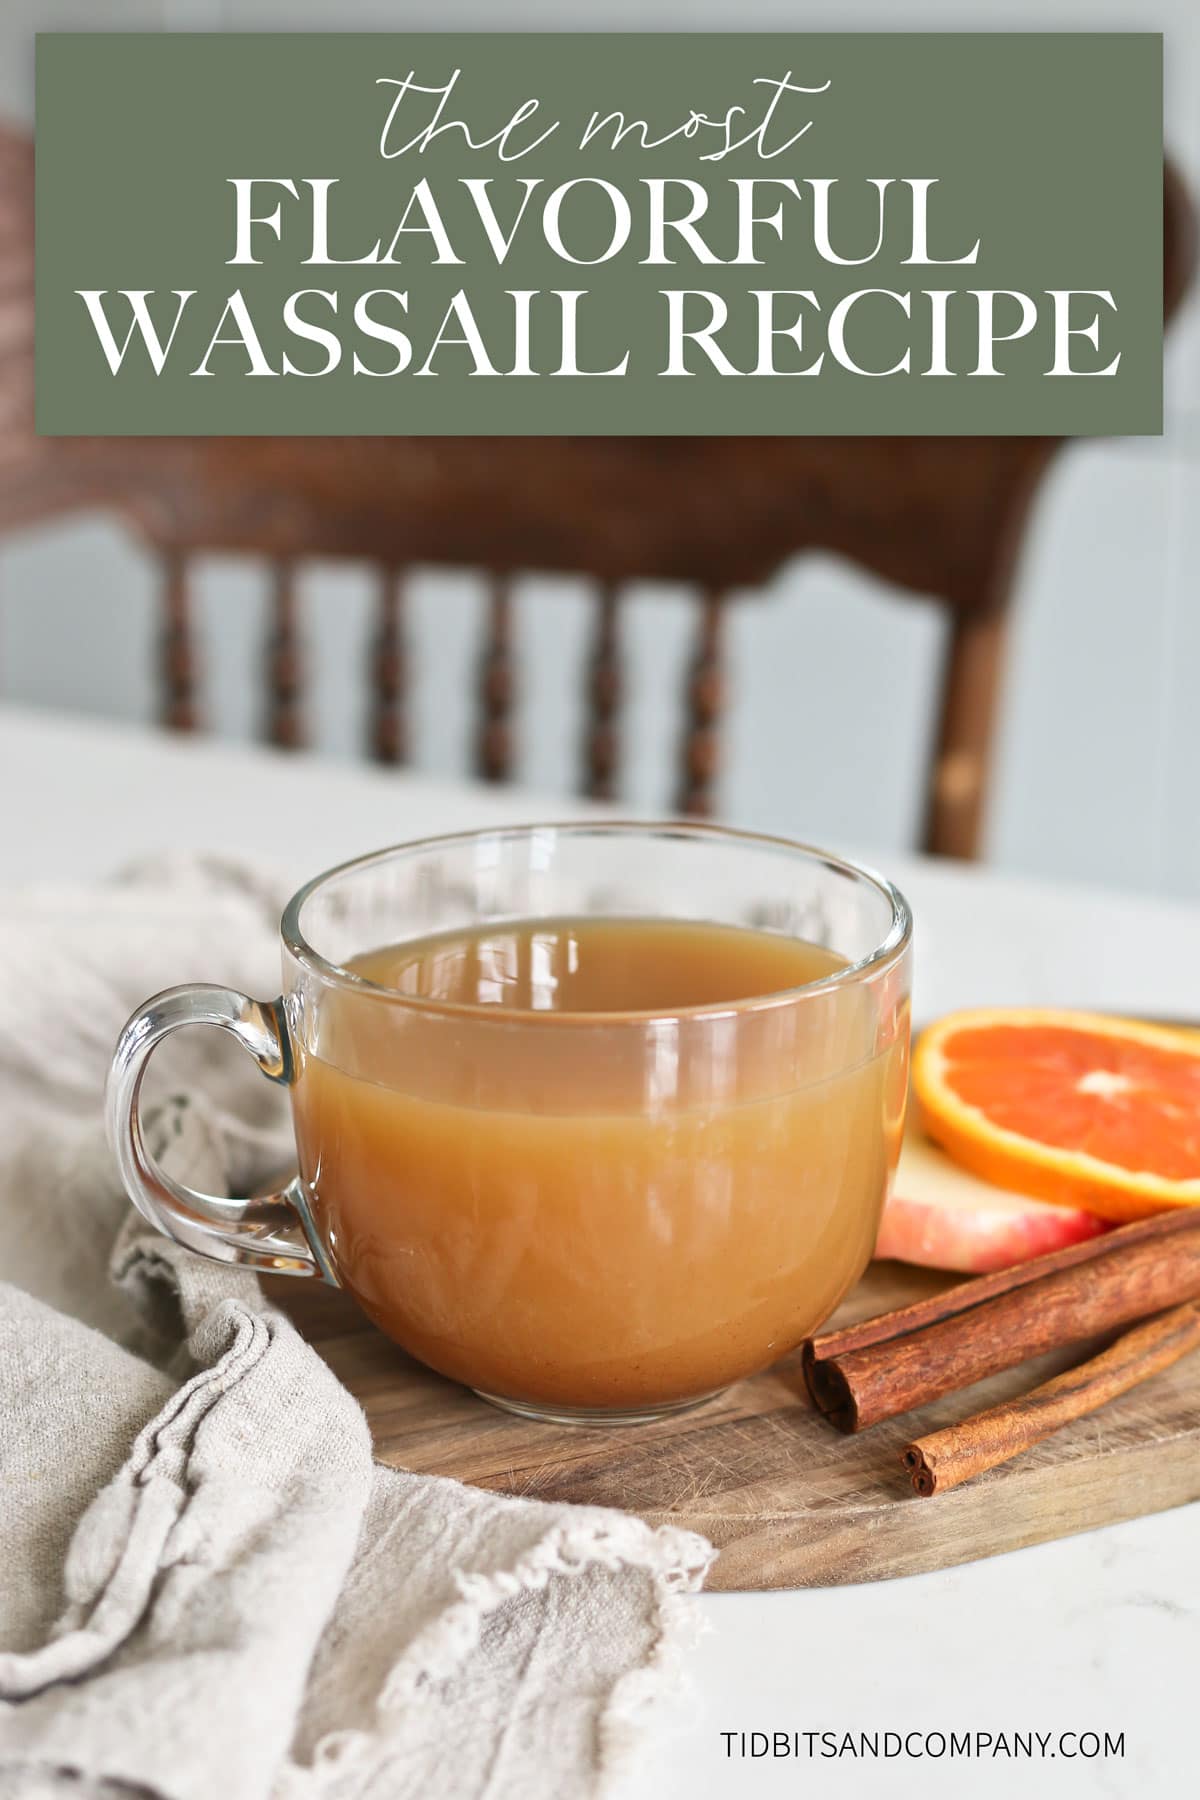 A cup of the most flavorful wassail recipe